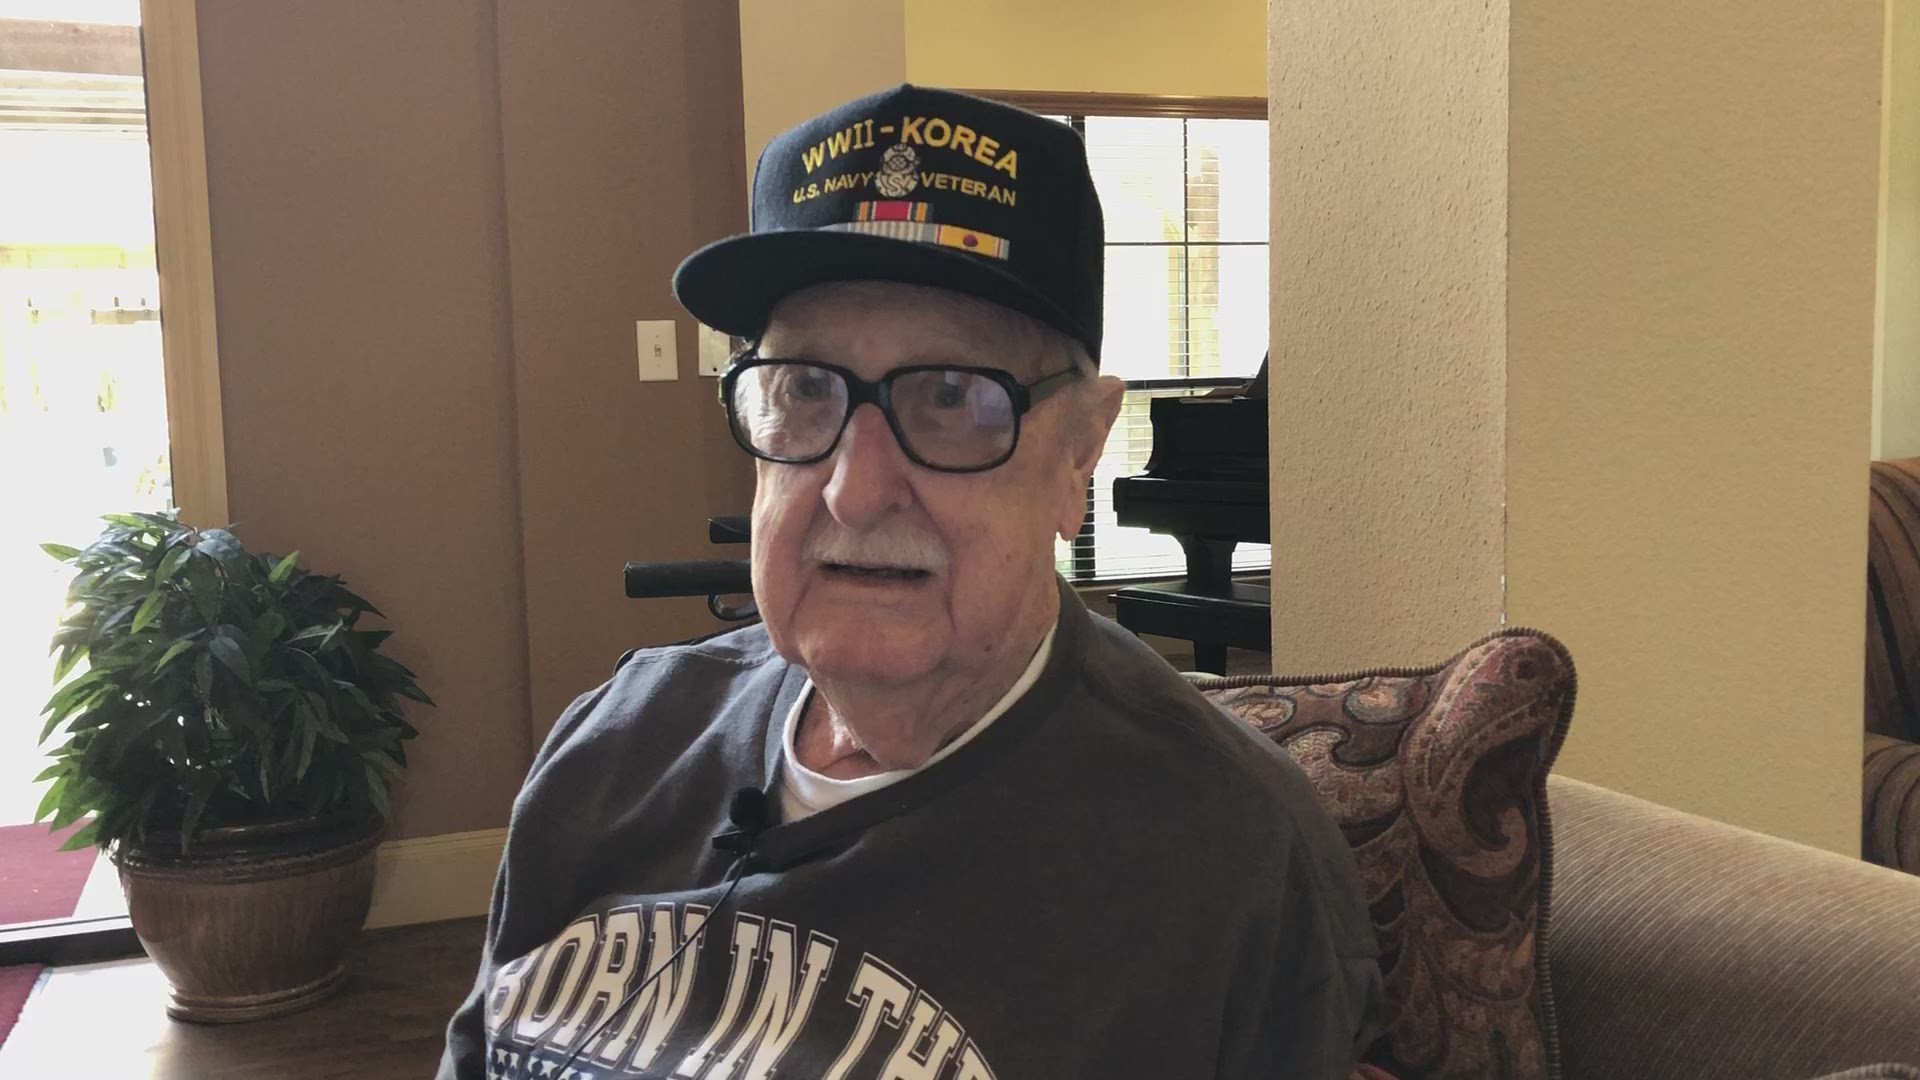 World War II veteran Herman Hechler was a deep sea diver in Korea and explored many places including a 350-pound Russian mine. He said he was a yard mine sweeper on the East Coast, where he swept the lanes for mines before heading off to Korea.